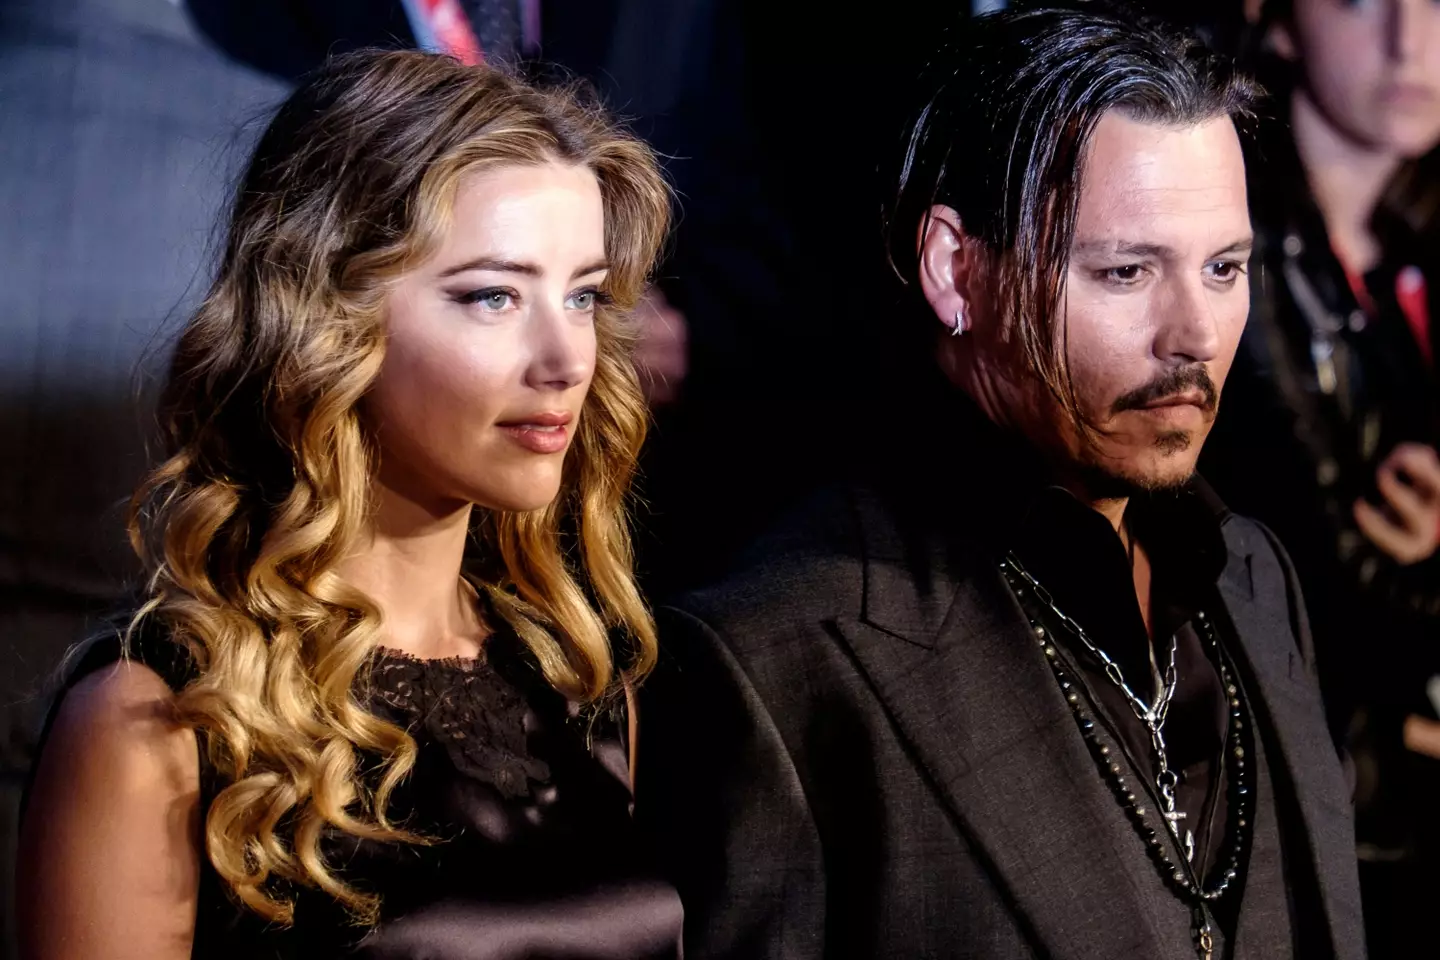 Johnny Depp’s $50m defamation suit against Amber Heard will continue today.